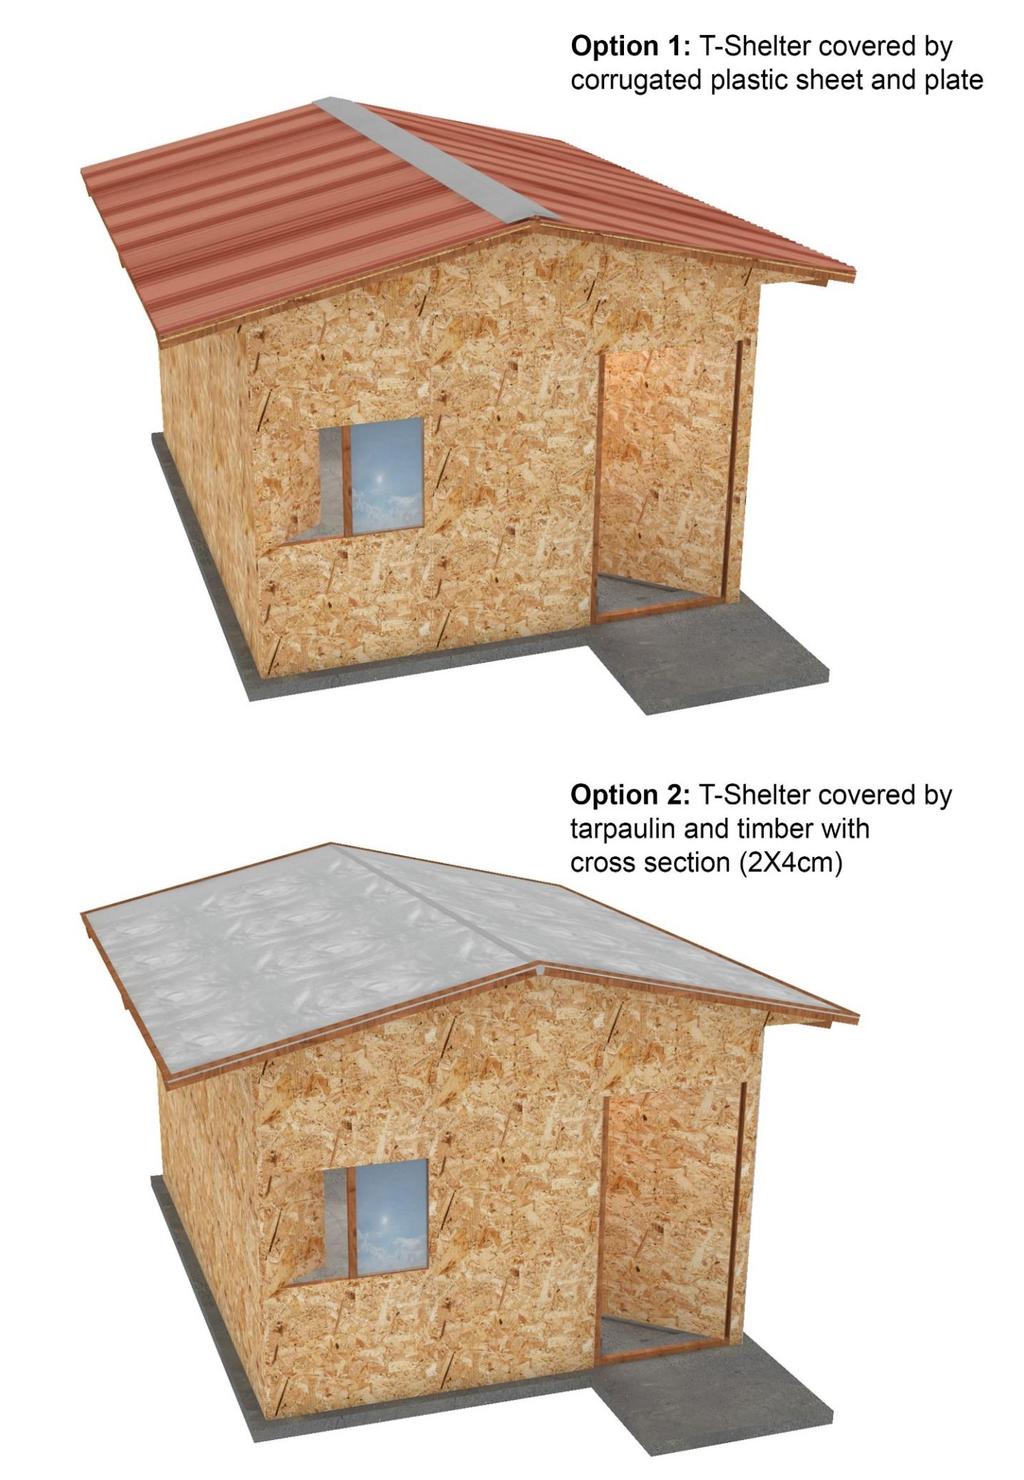 Scope of Work for Small Size Tshelter Units (5 persons)